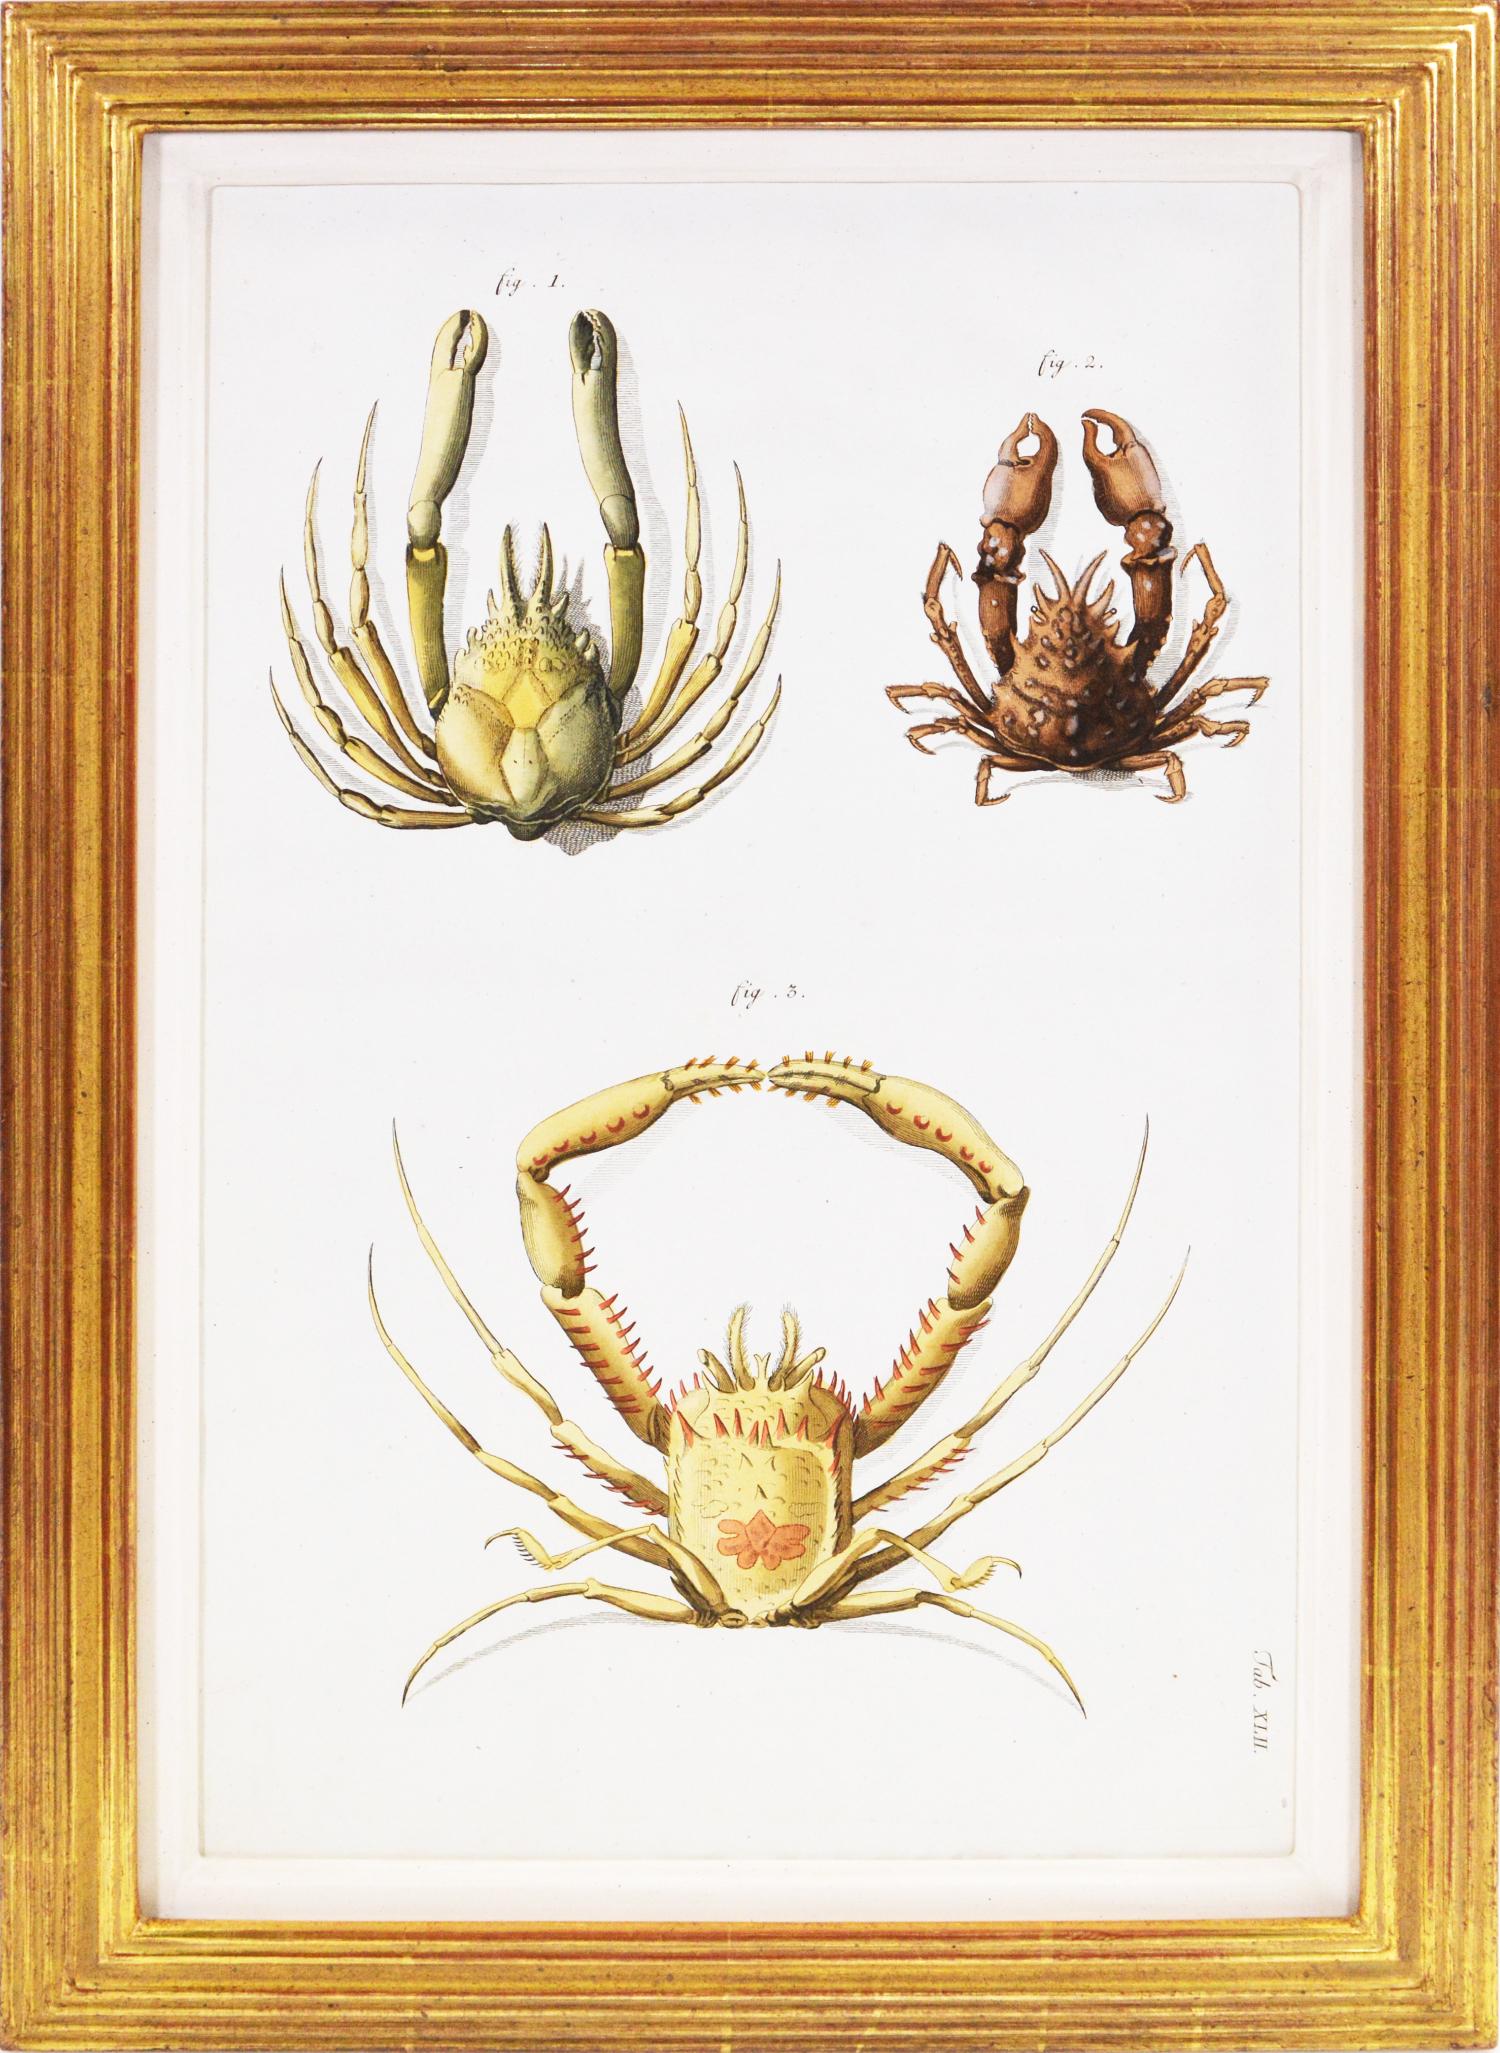 HERBST. A Group of Six Crustraceans: Crabs - Naturalistic Print by Johann Friedrich Wilhelm Herbst